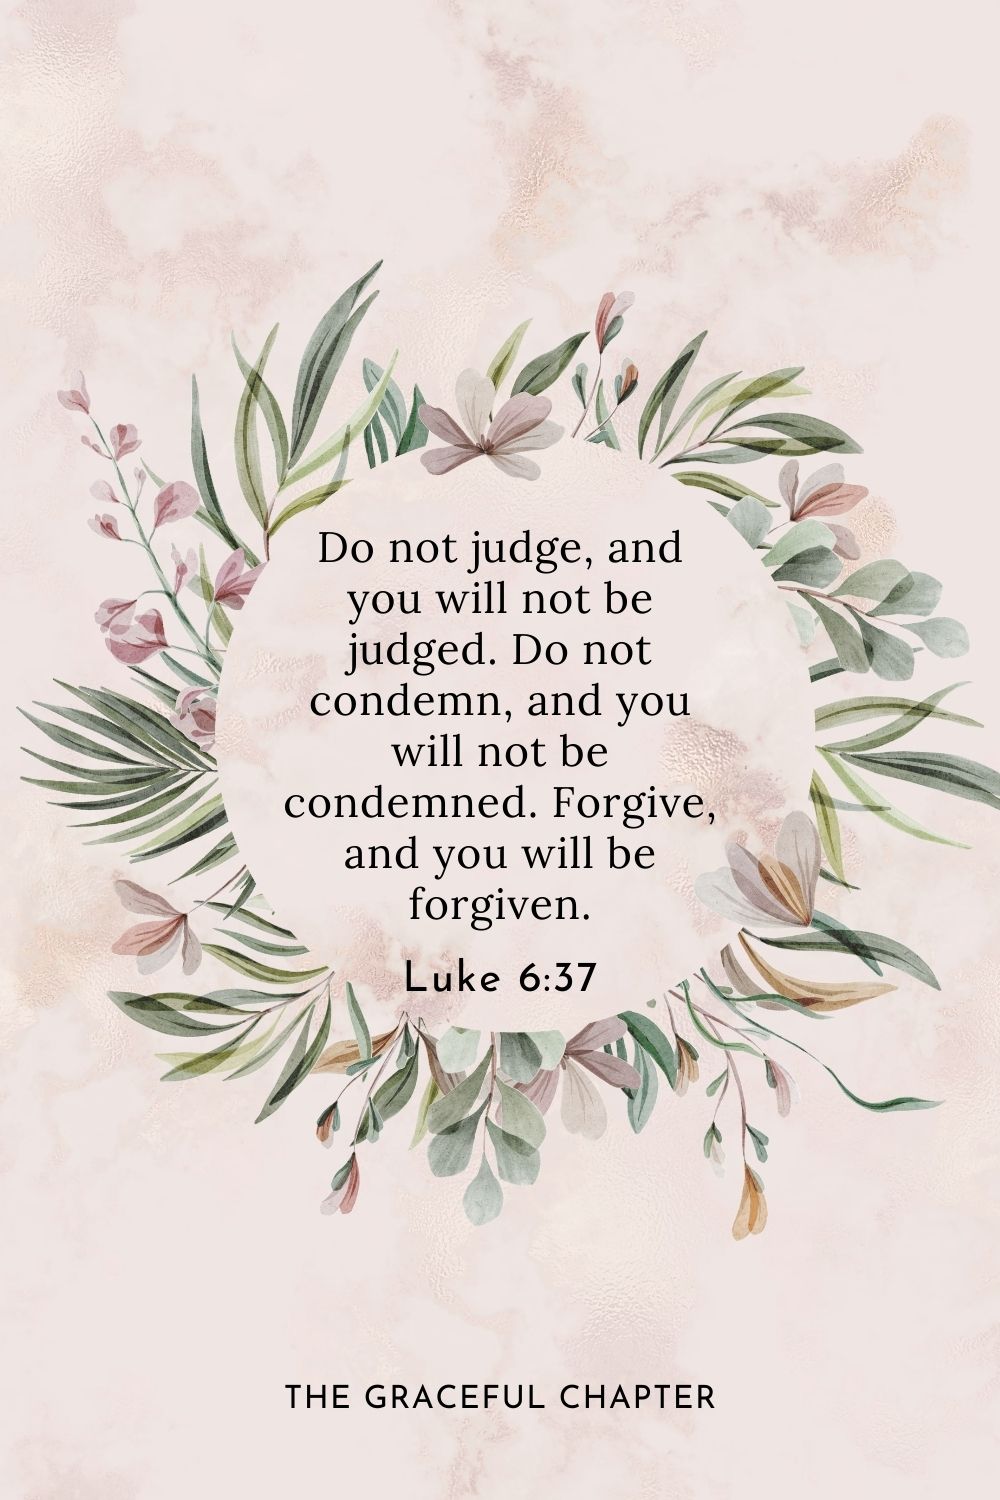 Do not judge, and you will not be judged. Do not condemn, and you will not be condemned. Forgive, and you will be forgiven. Luke 6:37